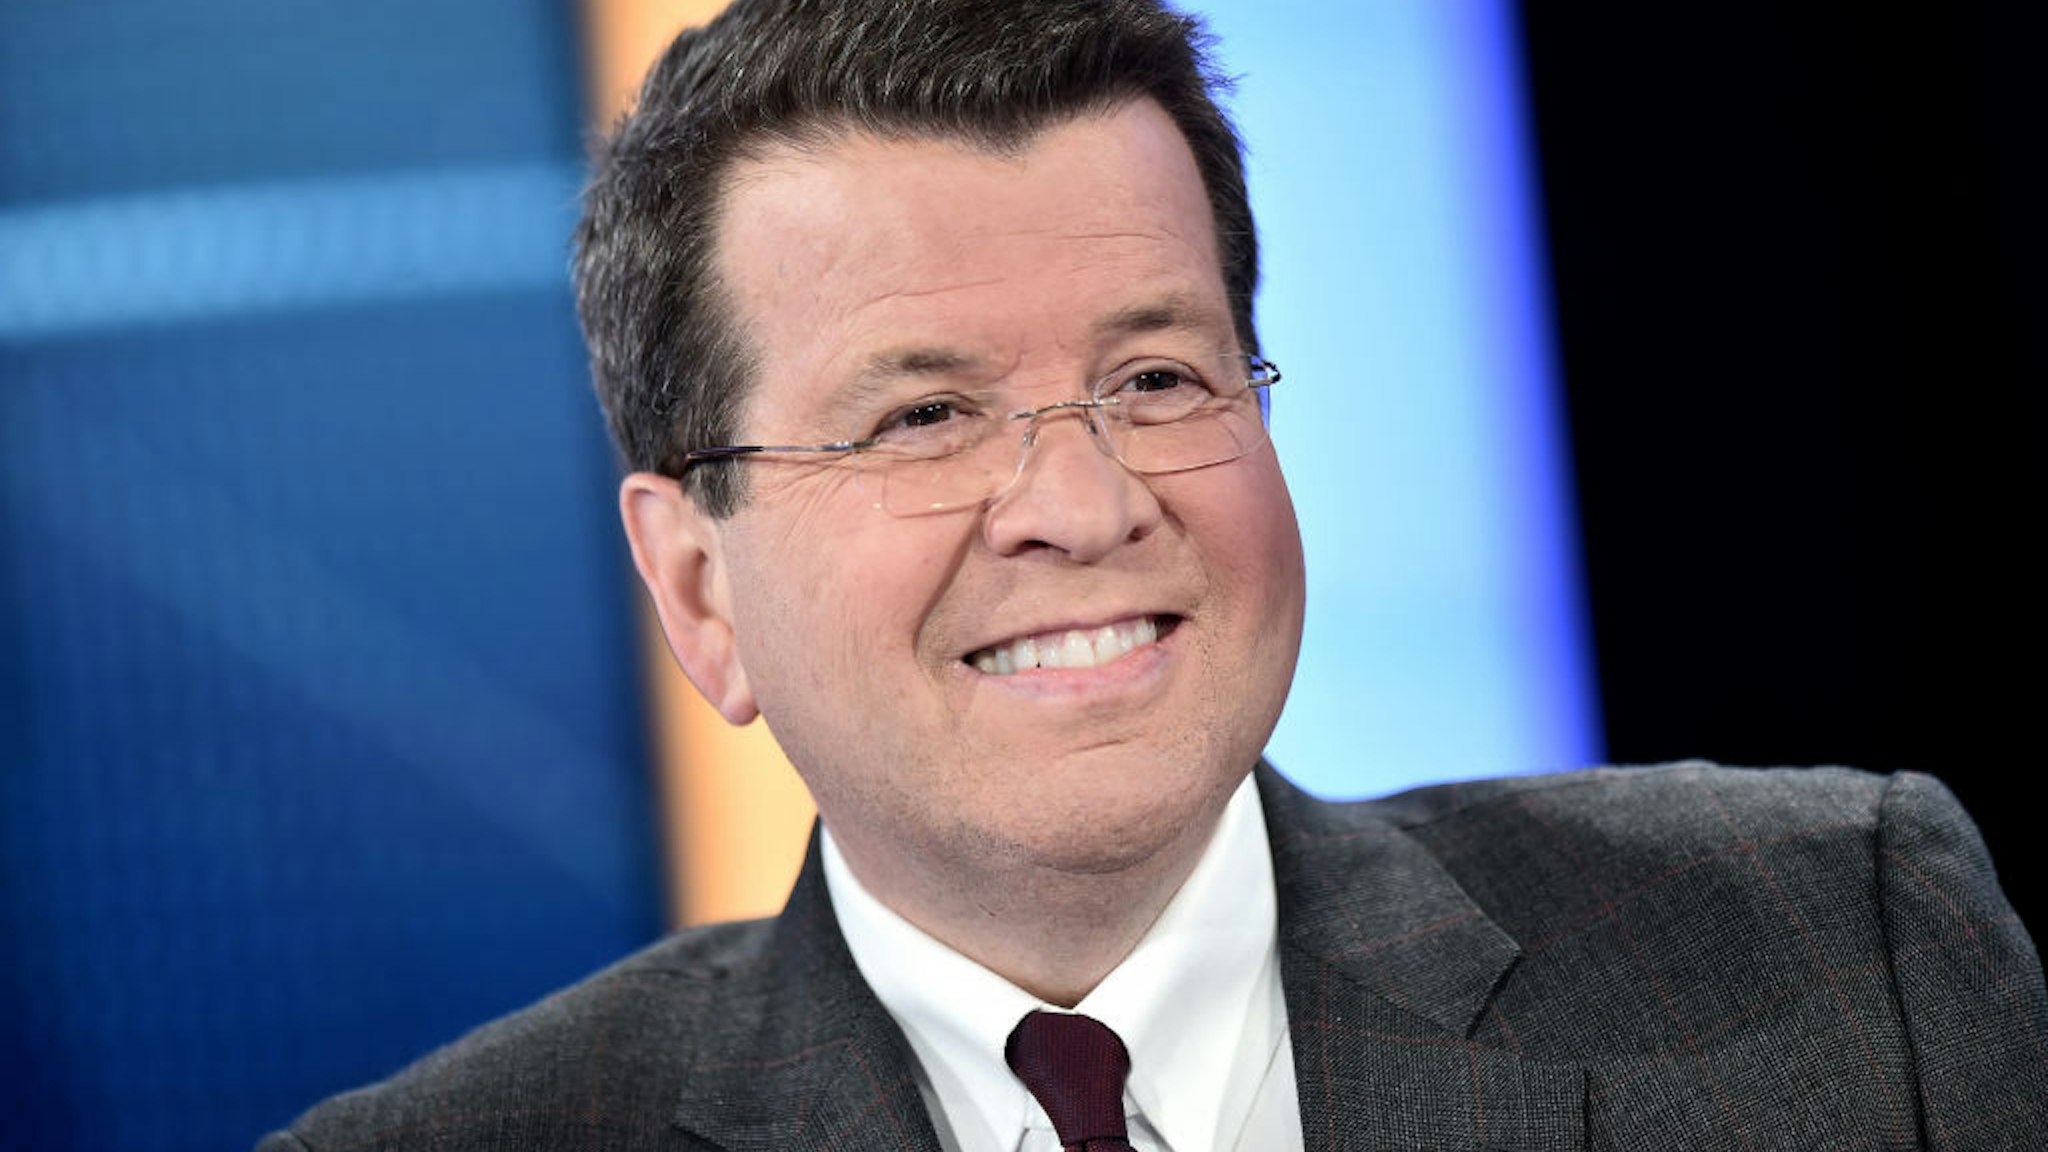 NEW YORK, NEW YORK - NOVEMBER 14: (EXCLUSIVE COVERAGE) Neil Cavuto hosts "Your World With Neil Cavuto" on at FOX Business Studios November 14, 2019 in New York, United States. (Photo by Steven Ferdman/Getty Images)